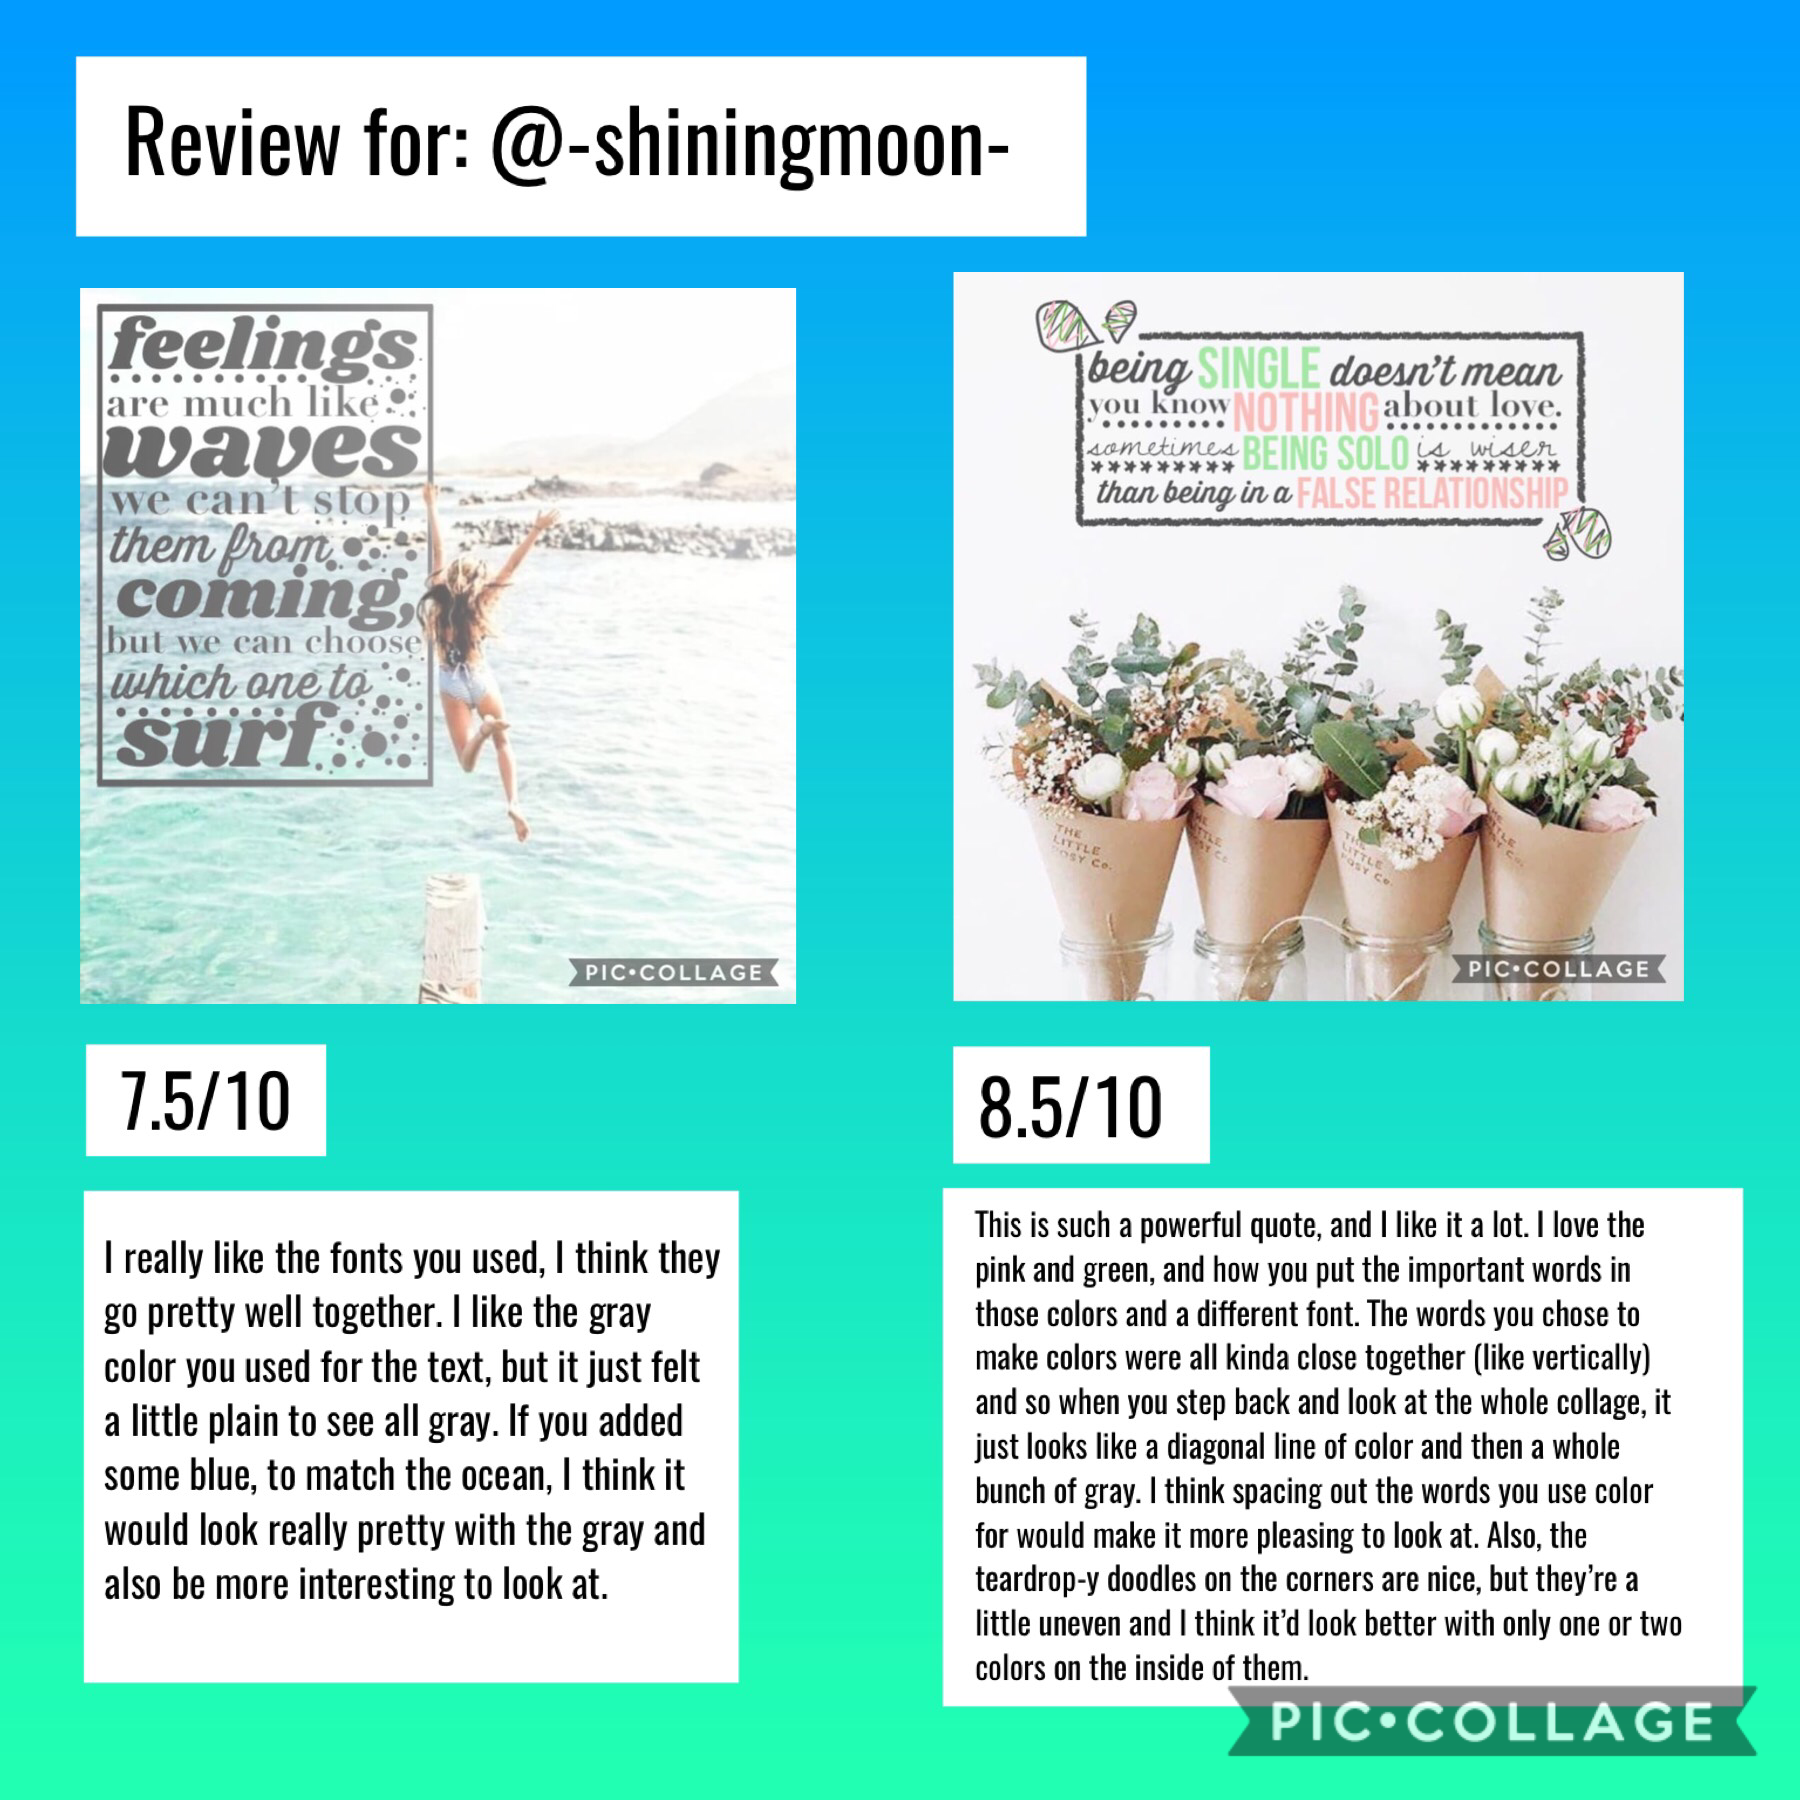 Account review for @-shiningmoon- ❤️